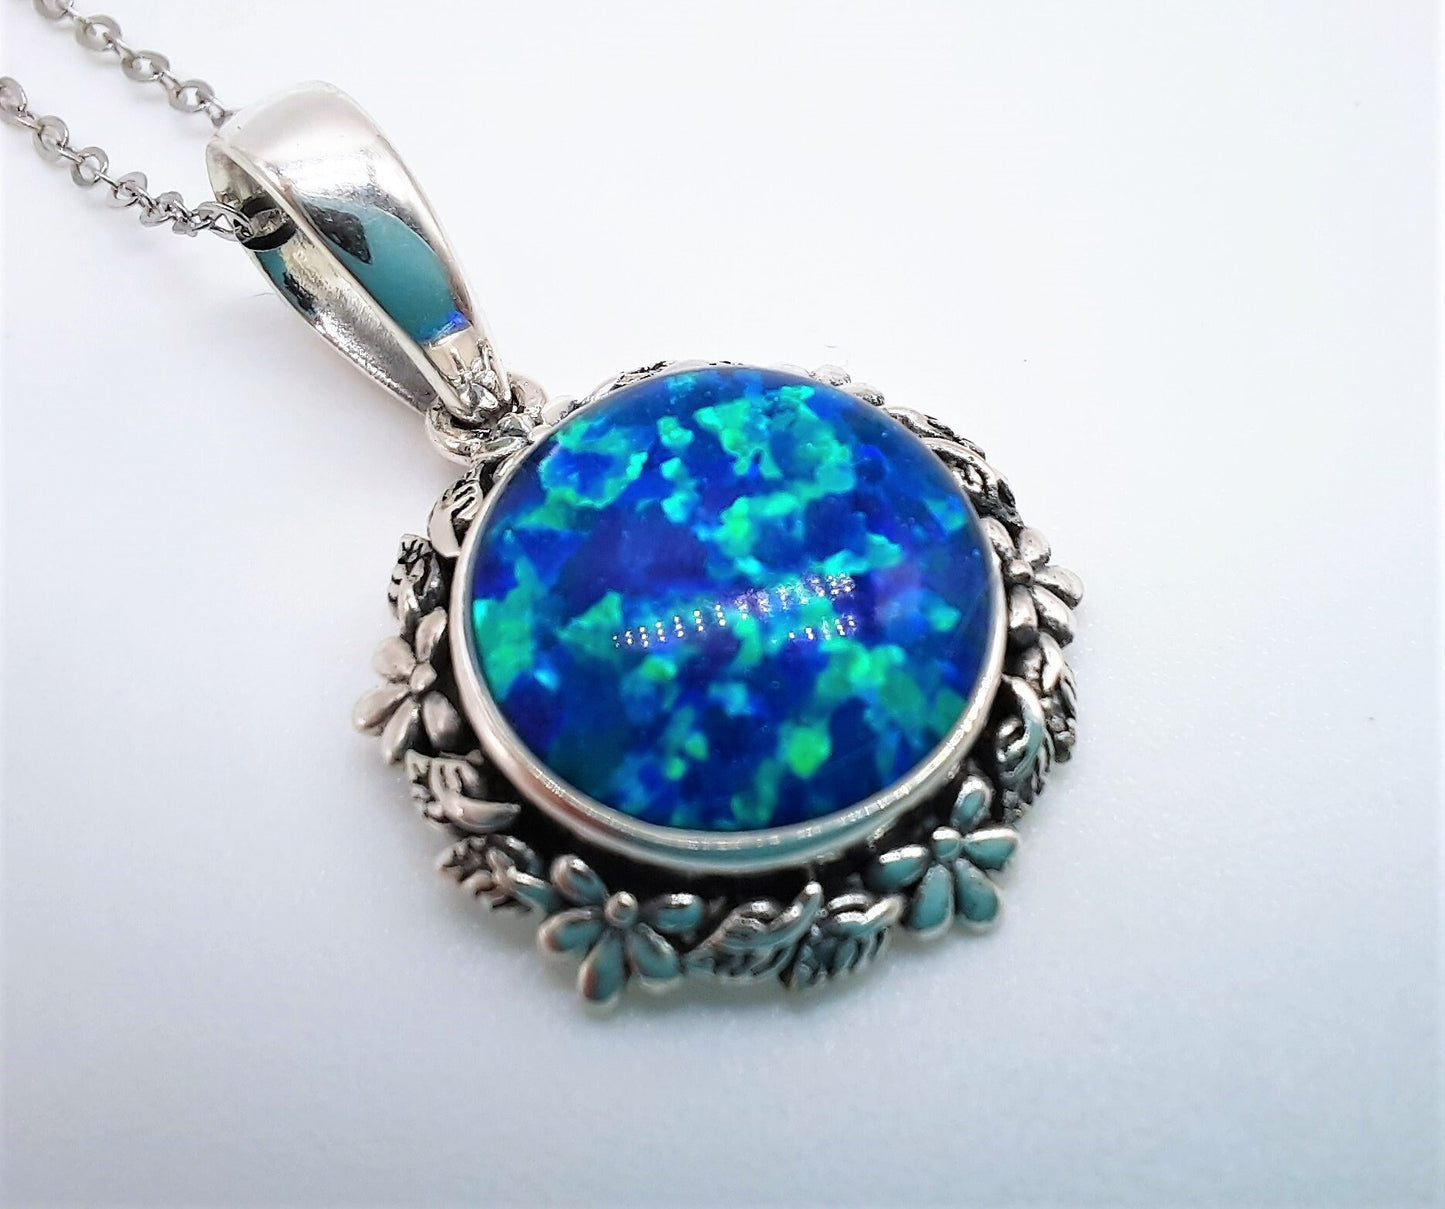 Handcrafted Iridescent Blue Opal Pendant Necklace - Flower and Leaf Design - Made with 925 Sterling Silver - Domed with Holographic Resin